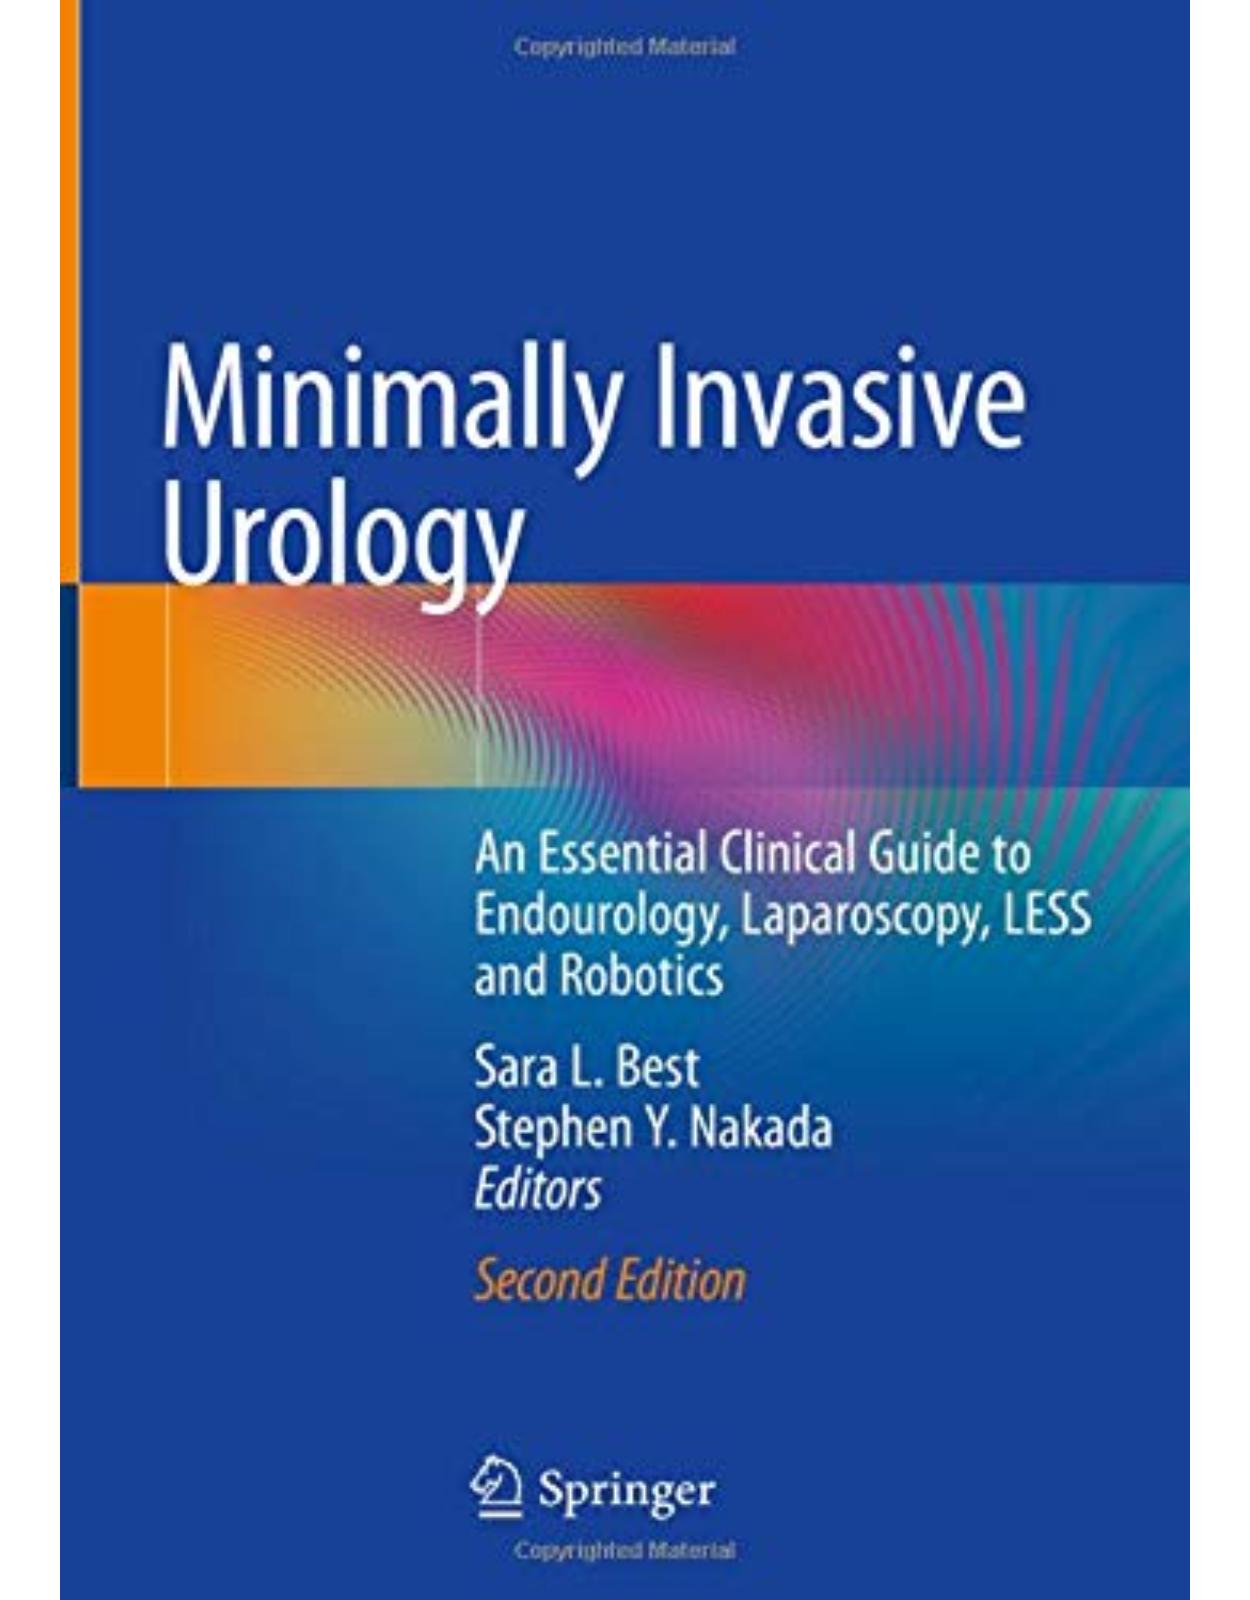 Minimally Invasive Urology. An Essential Clinical Guide to Endourology, Laparoscopy, LESS and Robotics